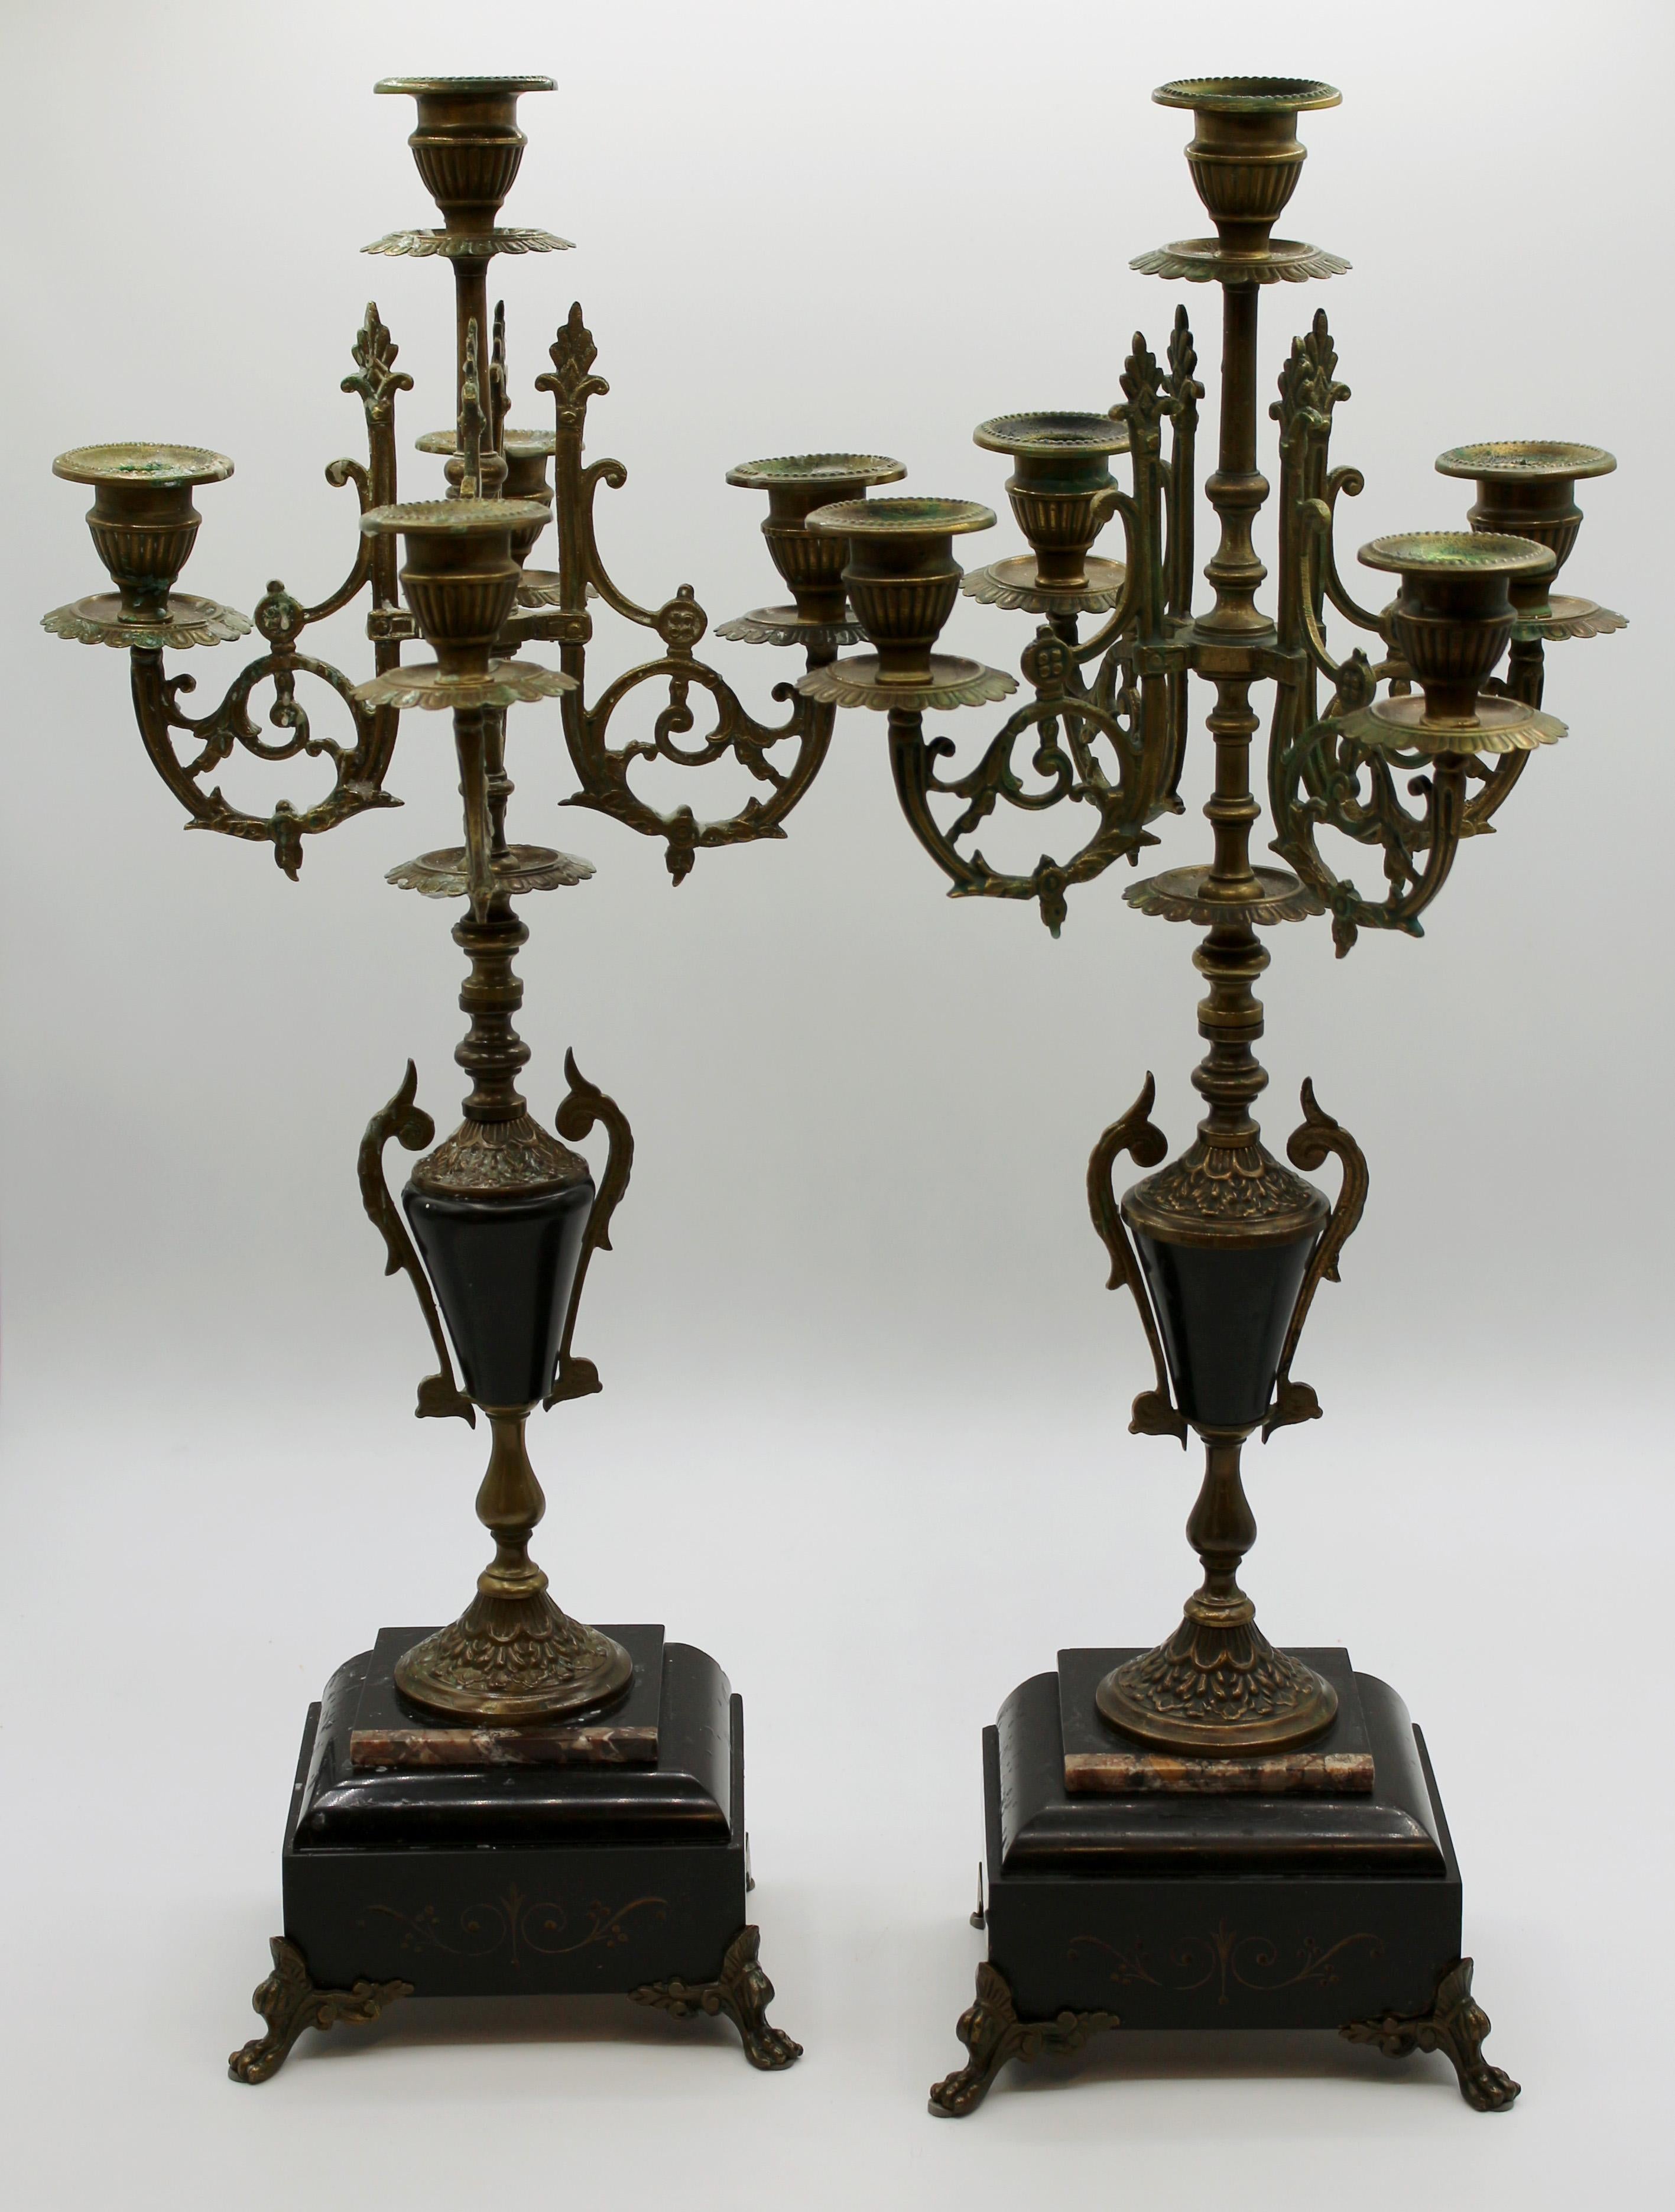 Circa 1870s pair of candelabras, Anglo-American, black slate and cast brass. The slate engraved and gilded. Inset slice of variegated marble accent. Measures: 18.75